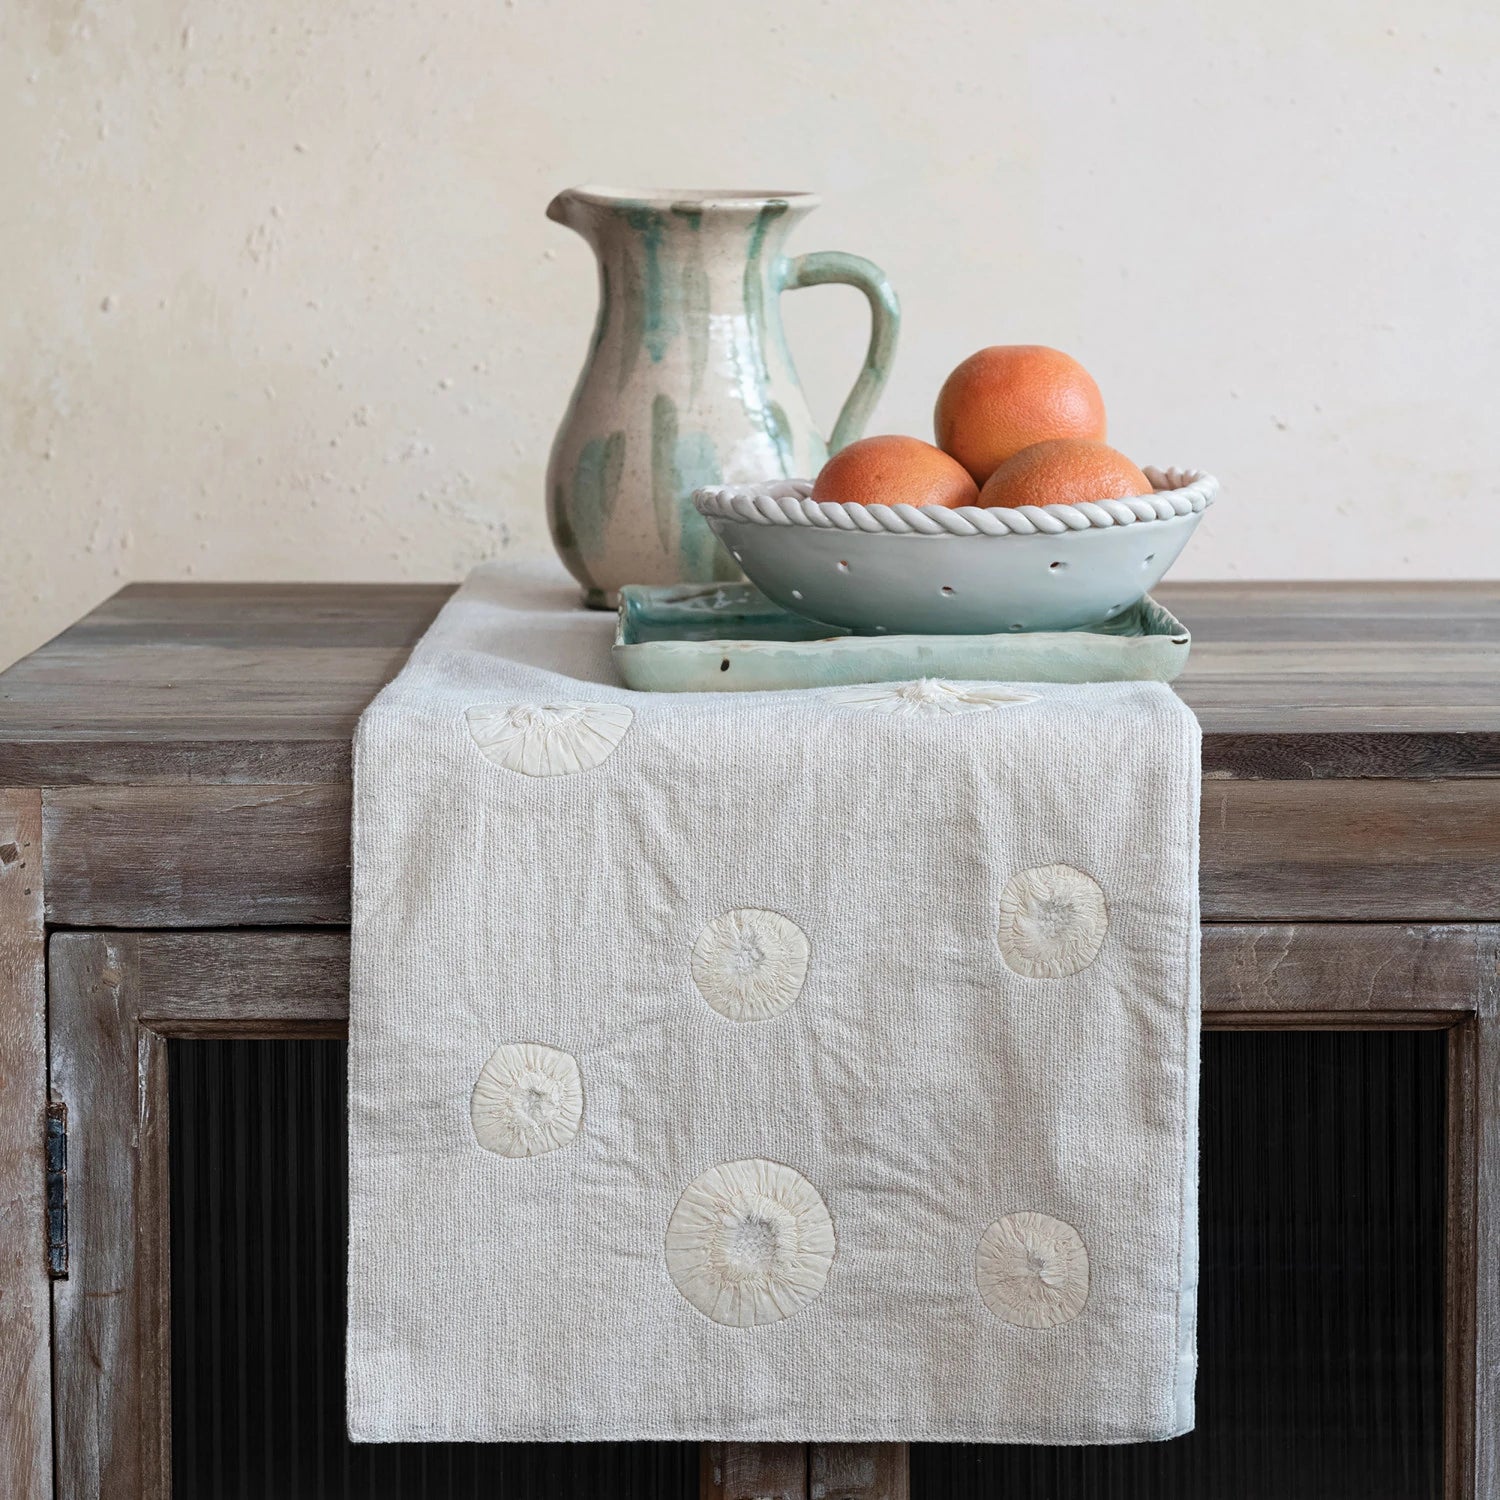 Handmade woven cotton & linen table runner displayed on a wooden table with assorted stoneware. 